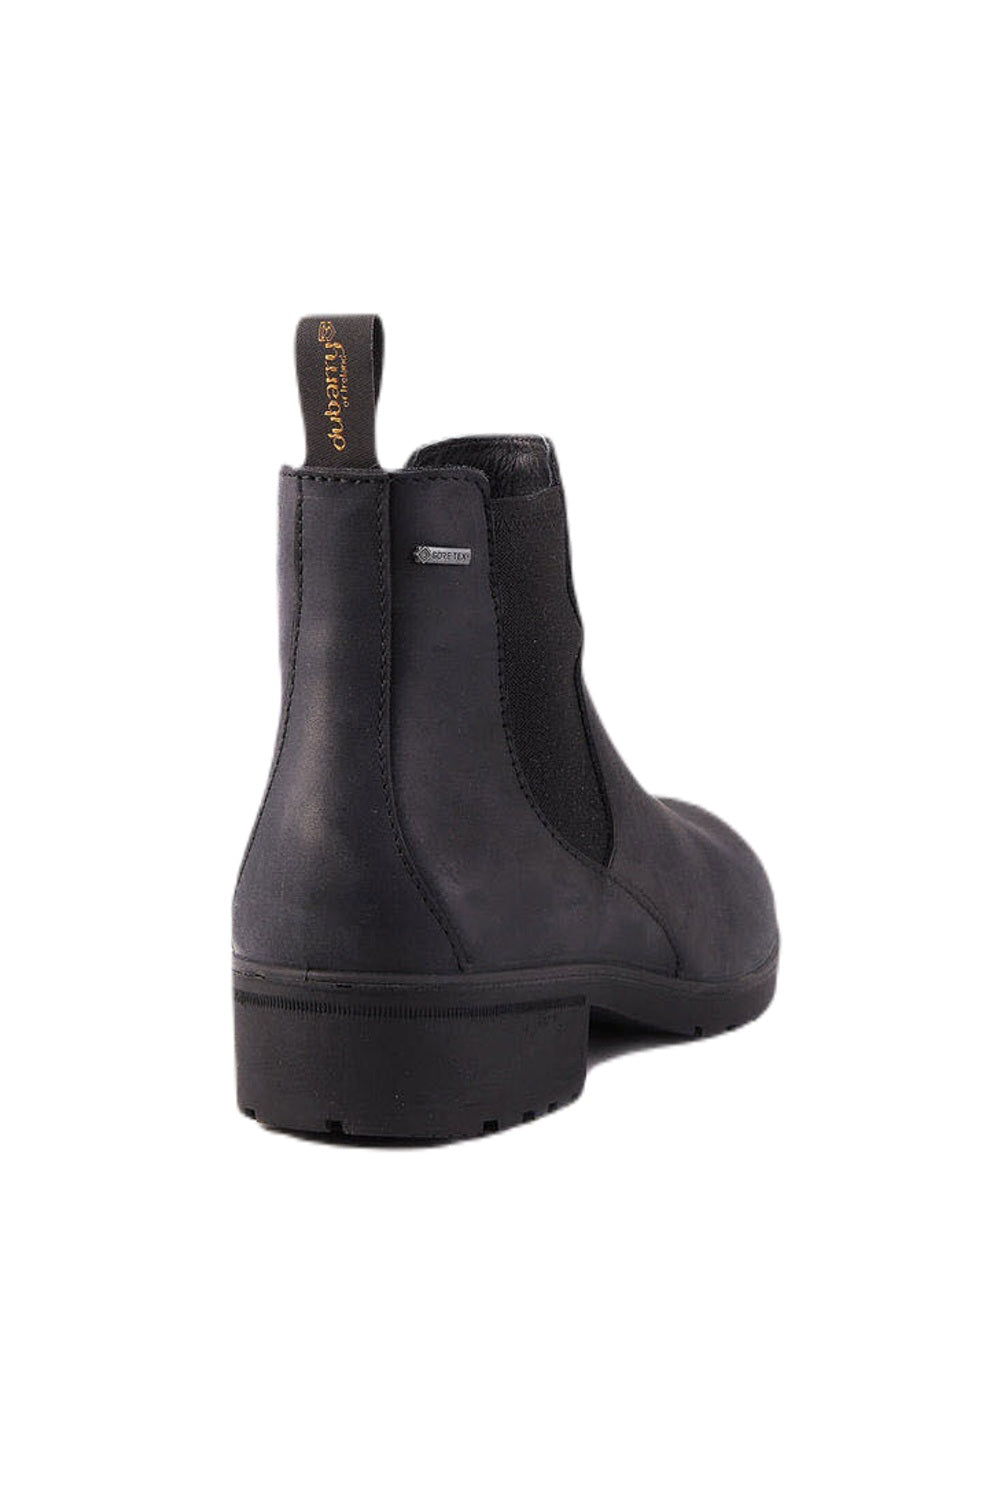 Dubarry Waterford Country Boots in Black 